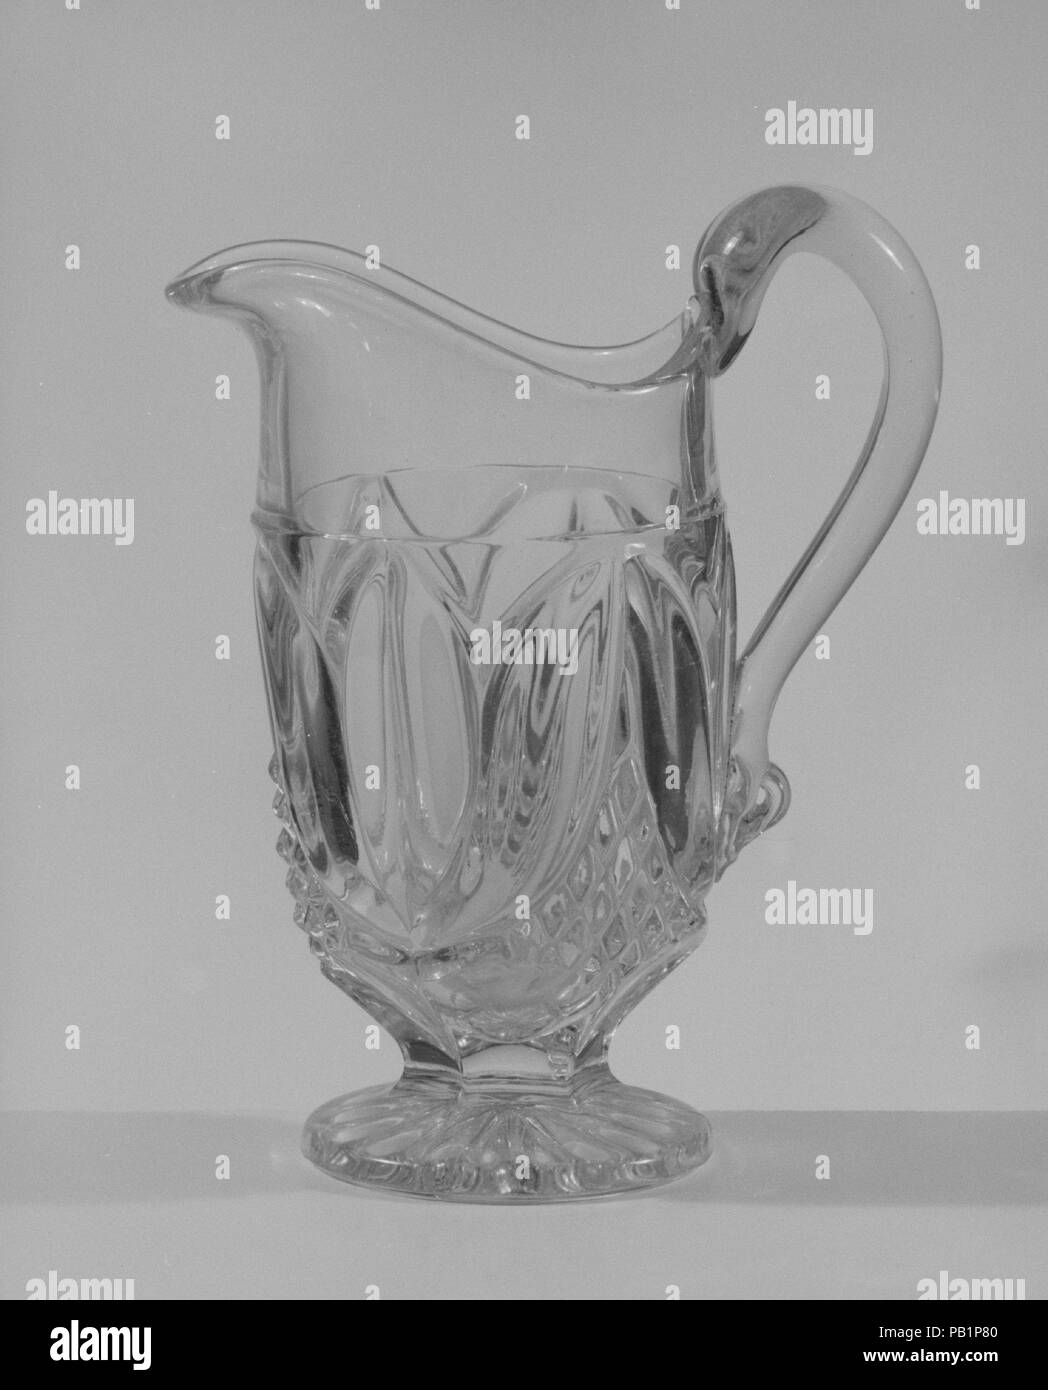 Pitcher. Culture: American. Dimensions: H. 6 3/8 in. (16.2 cm). Maker: Bryce, Walker and Company. Date: 1860-70. Museum: Metropolitan Museum of Art, New York, USA. Stock Photo